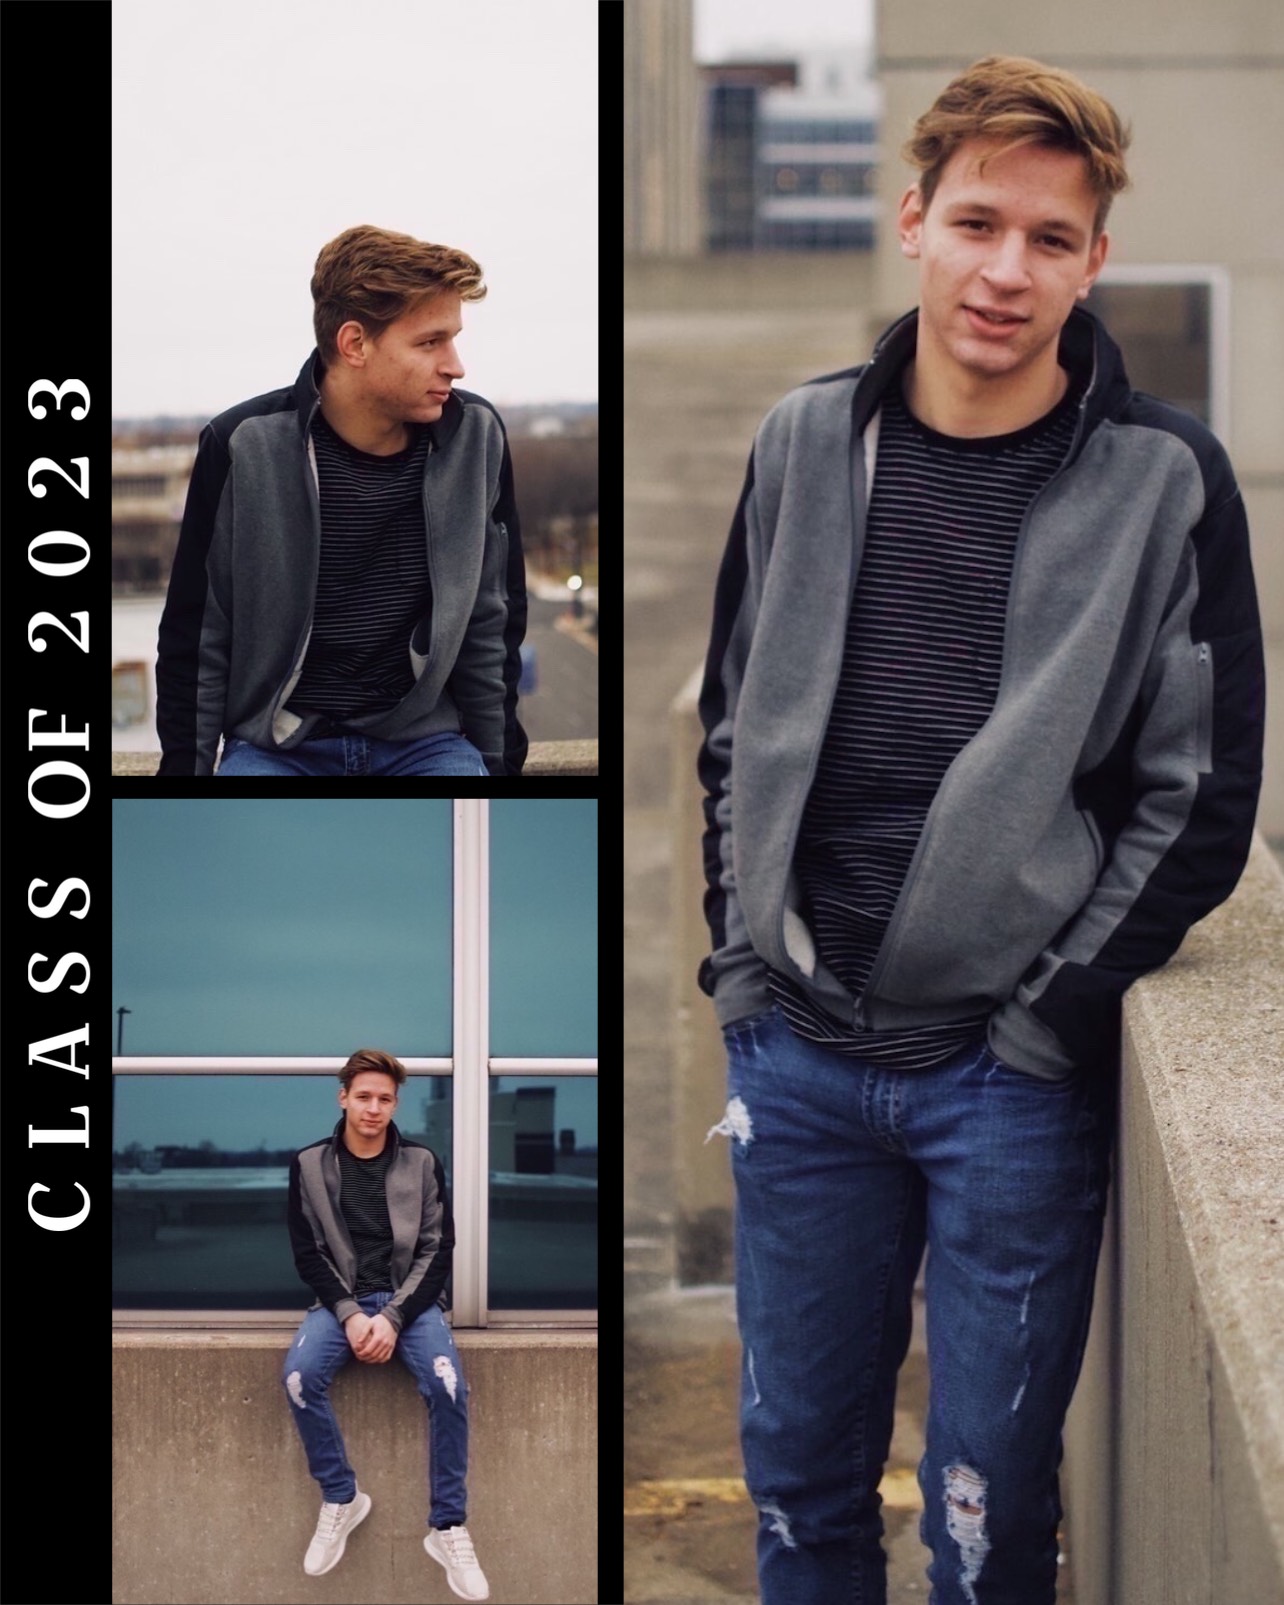 A Collage Of Photos Of A Young Man Graduation Template